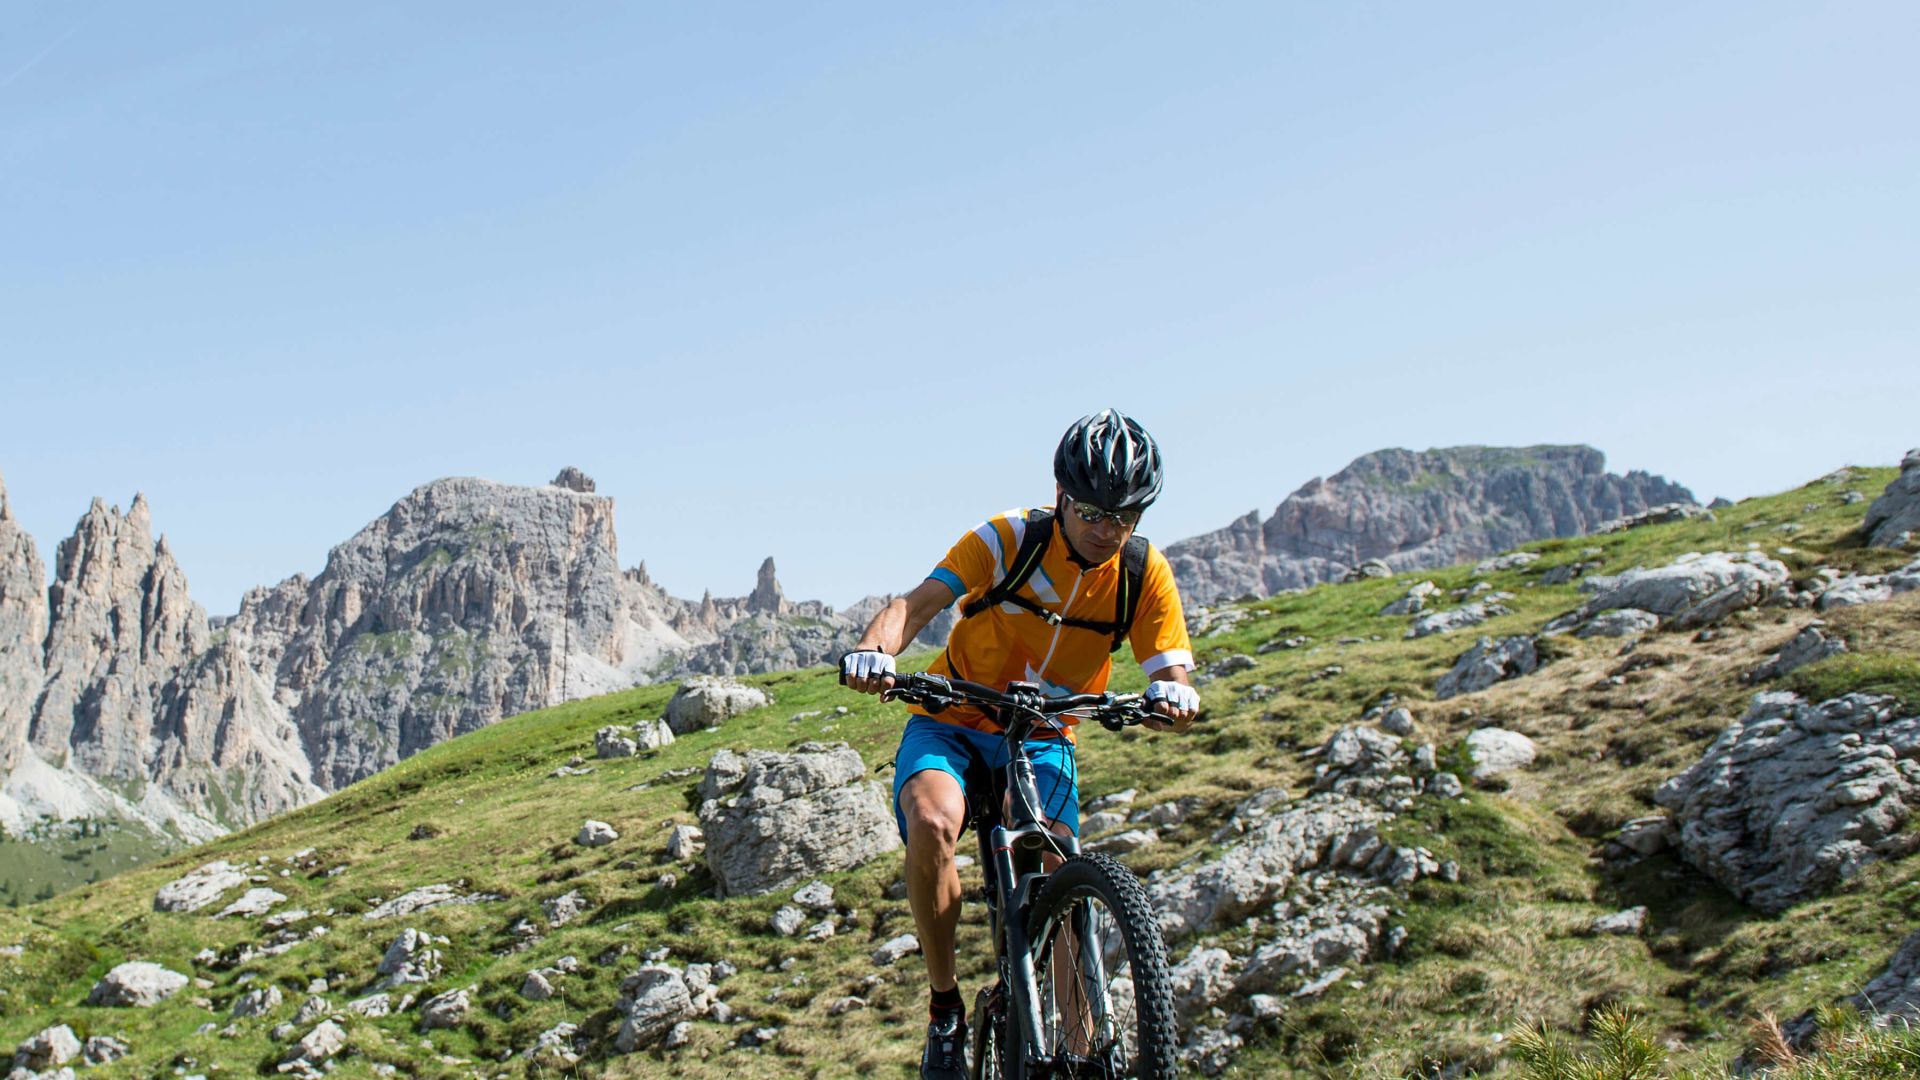 A Man Riding A Bike On A Trail In A Rocky Area